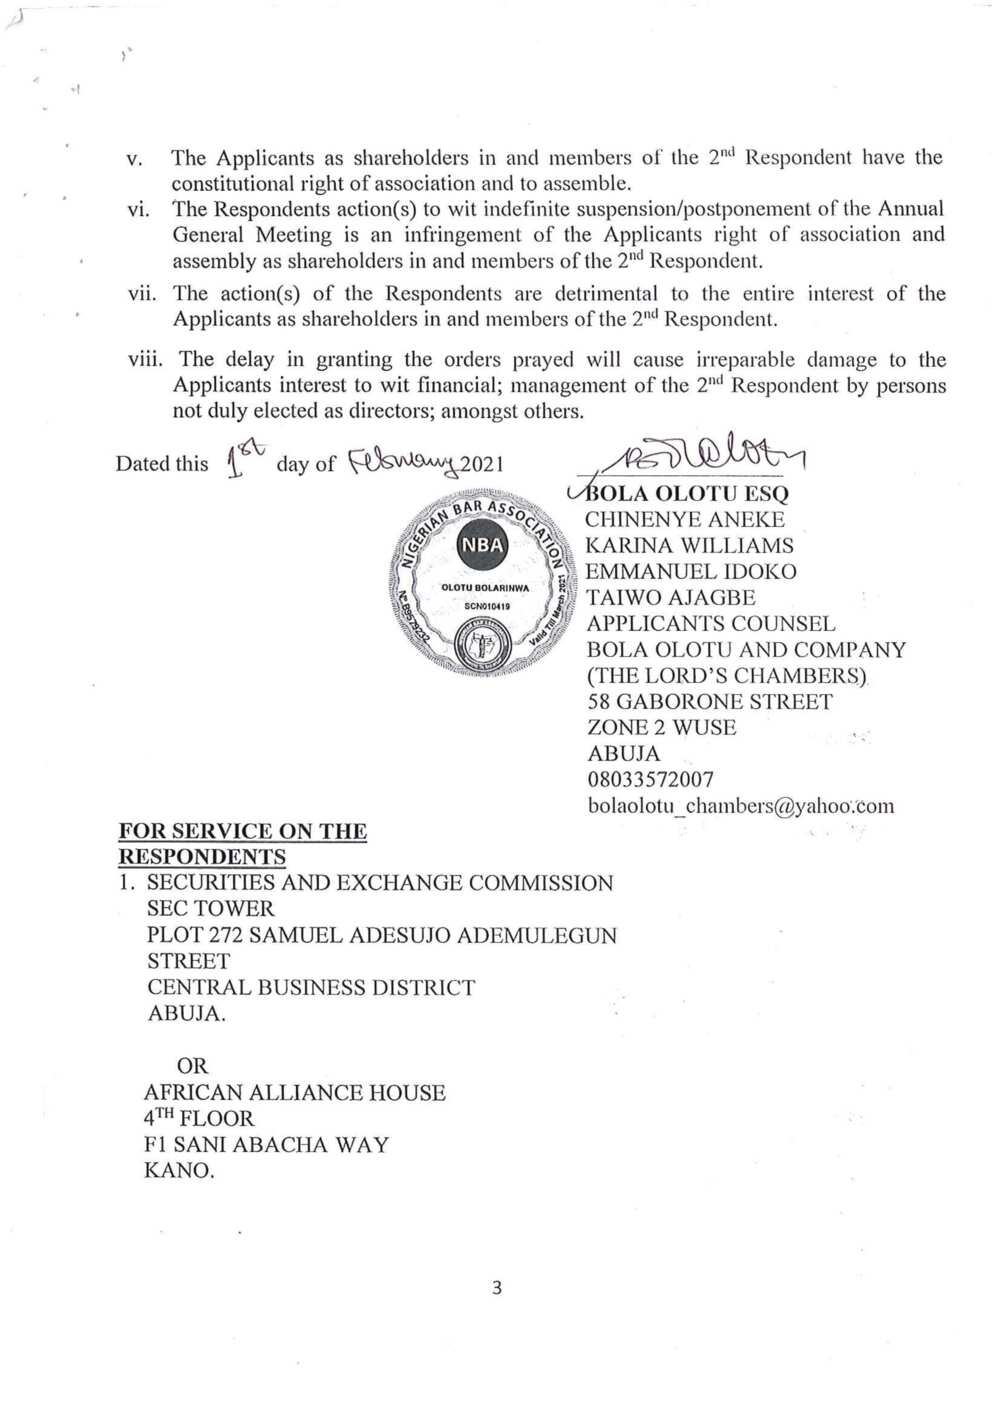 Oando shareholders have taken SEC to court to challenge penalties against Oando in May 31st letter